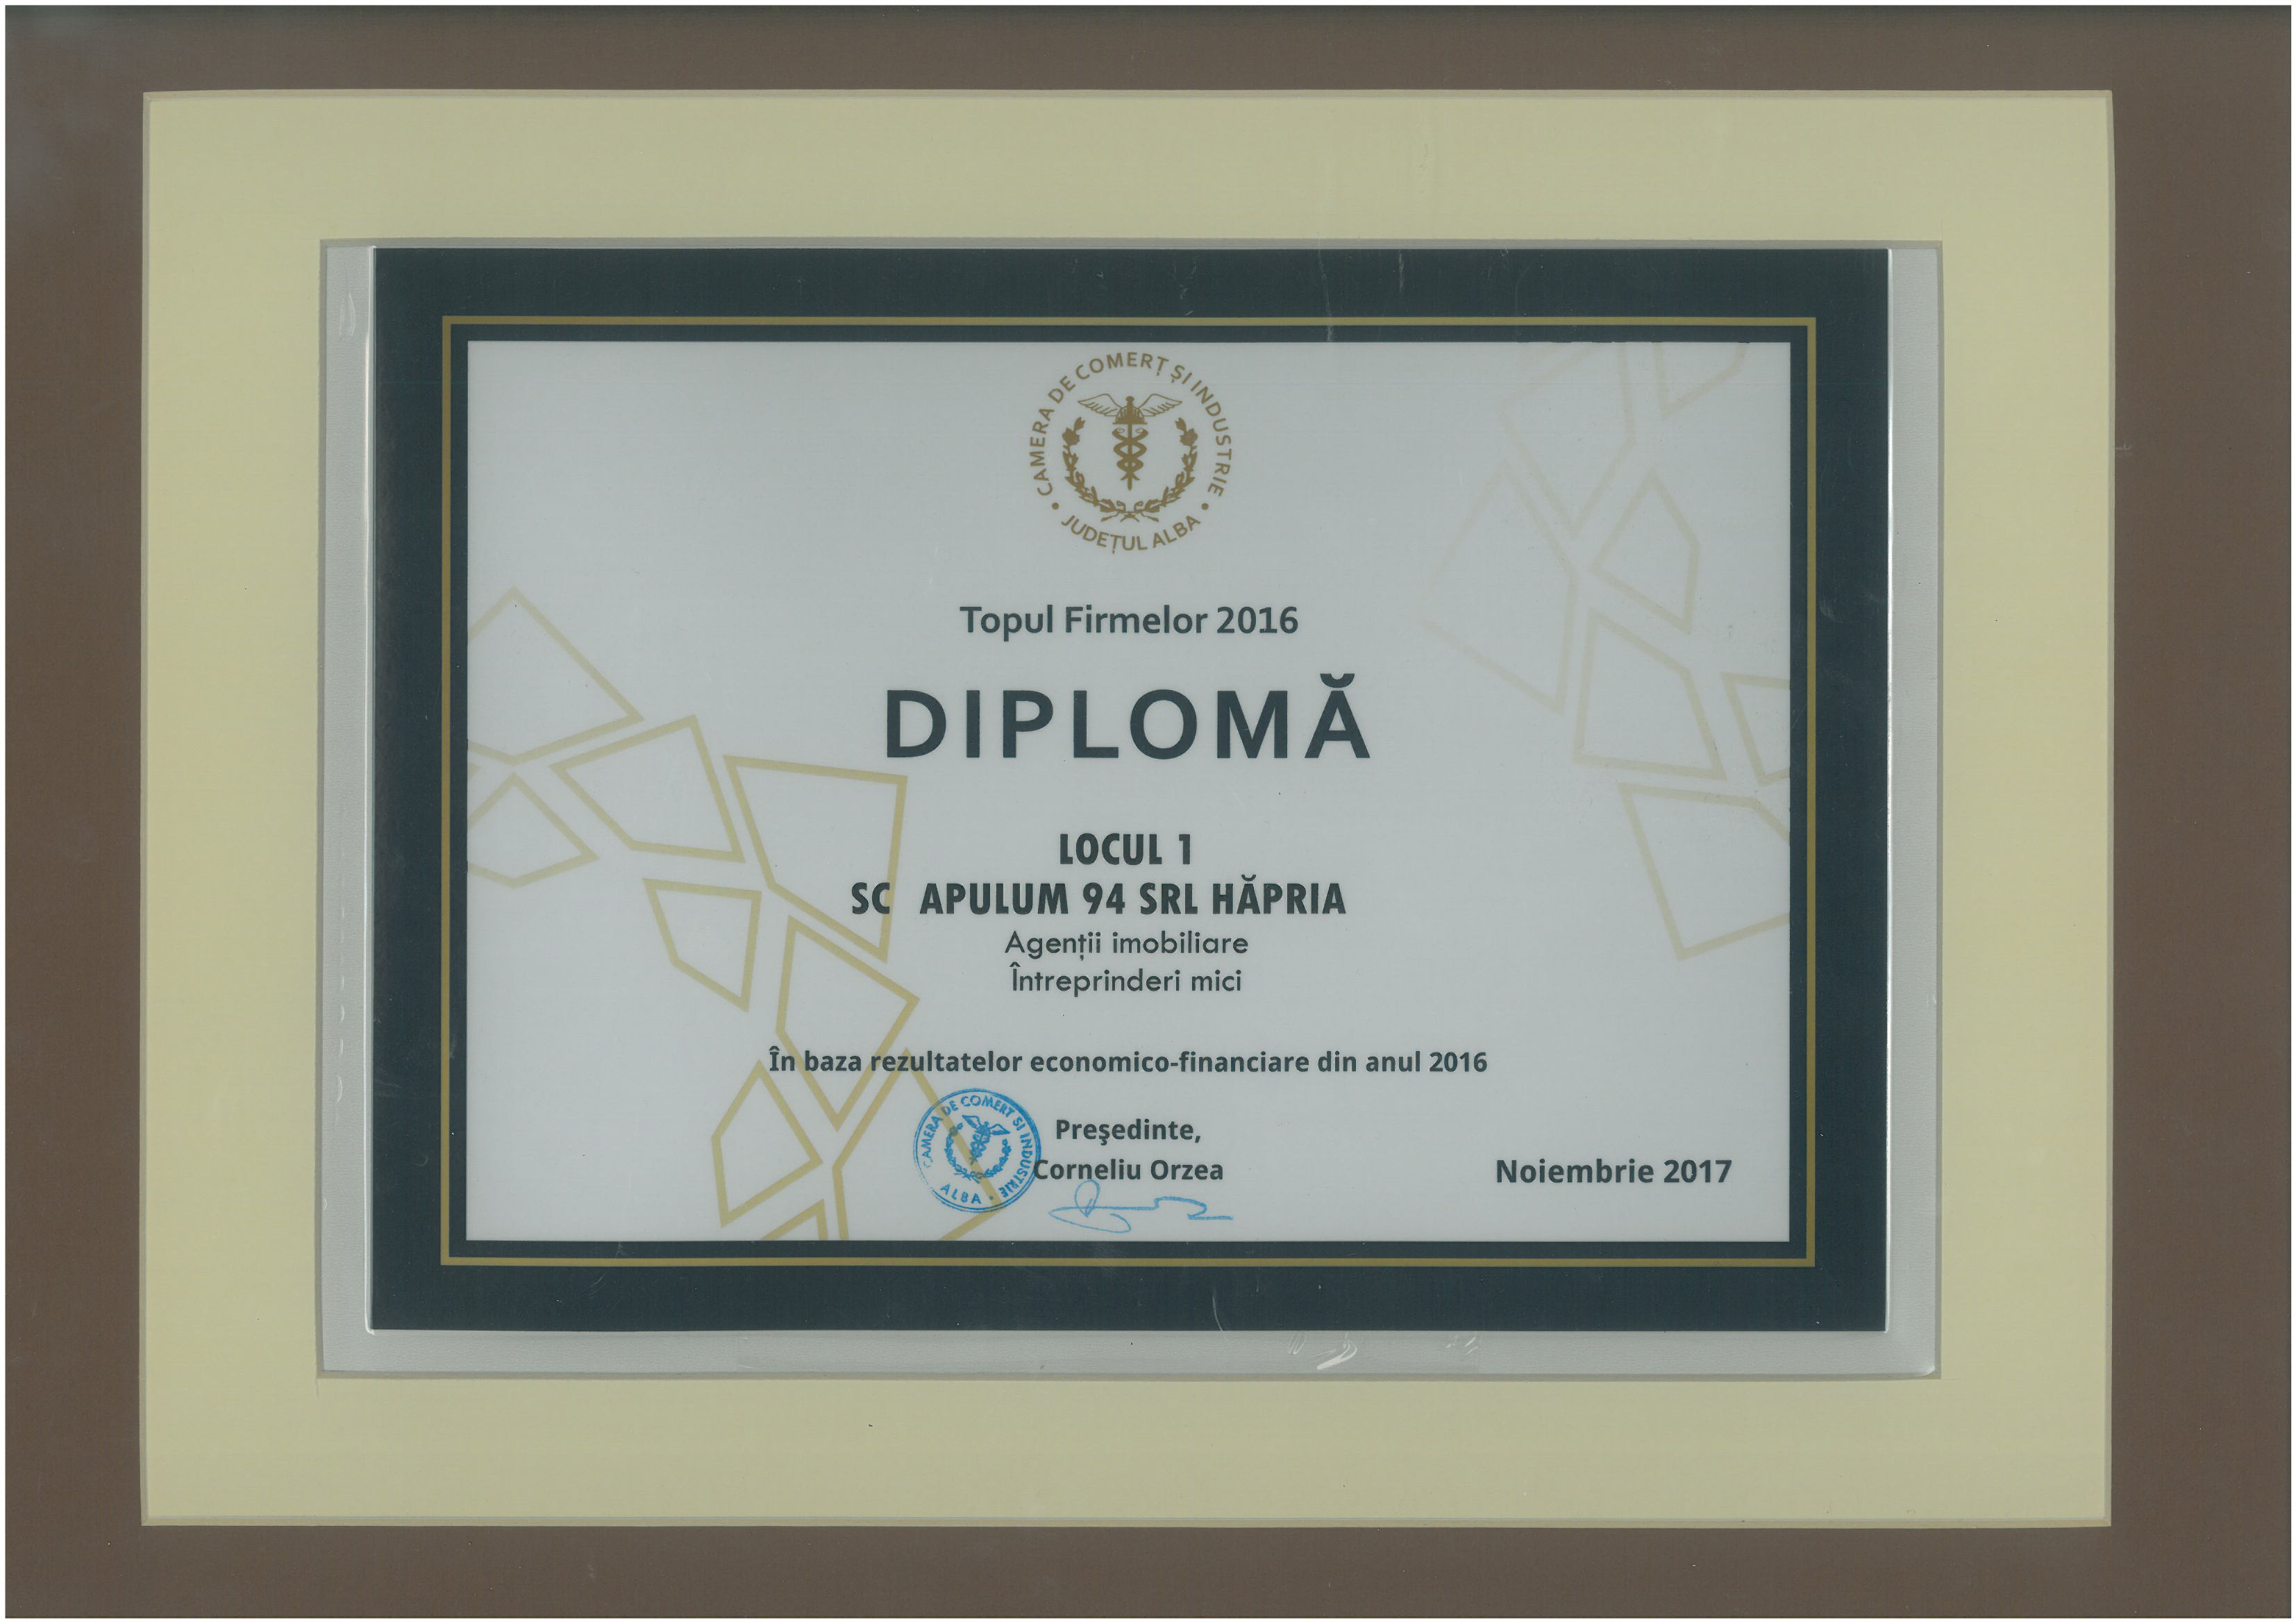 Diploma - Topul Firmelor - 2016